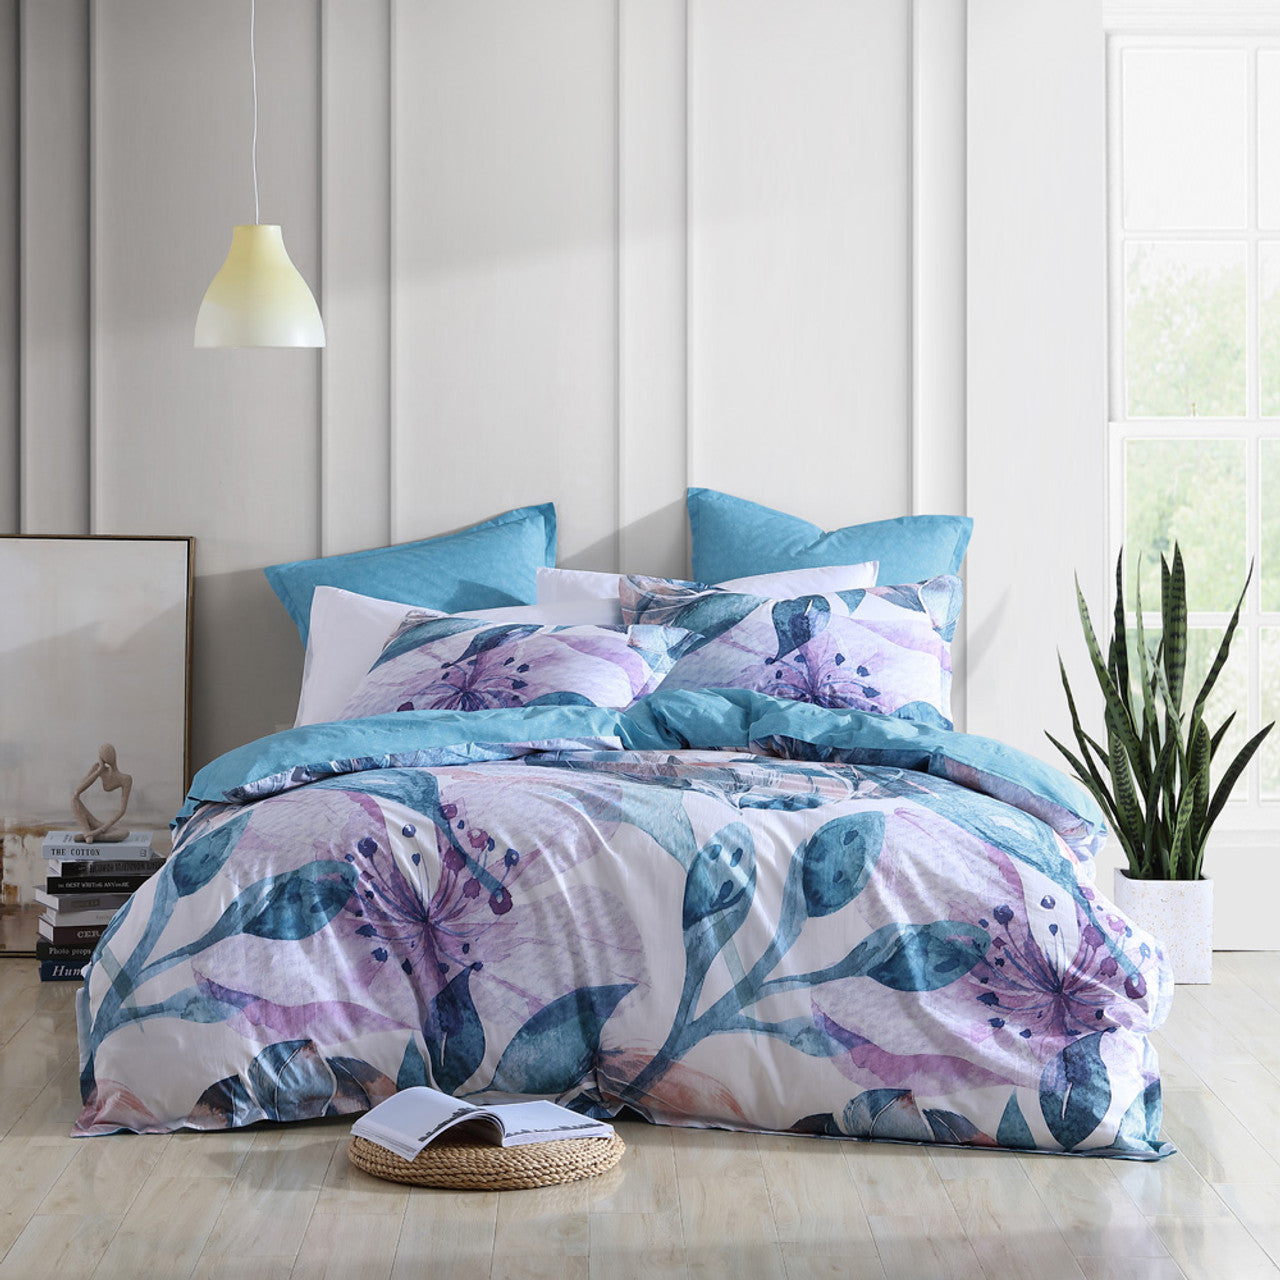 Indulge in the contemporary beauty of the Logan and Mason Teagan Lilac Quilt Cover Set, inspired by blooming flowers and lush foliage